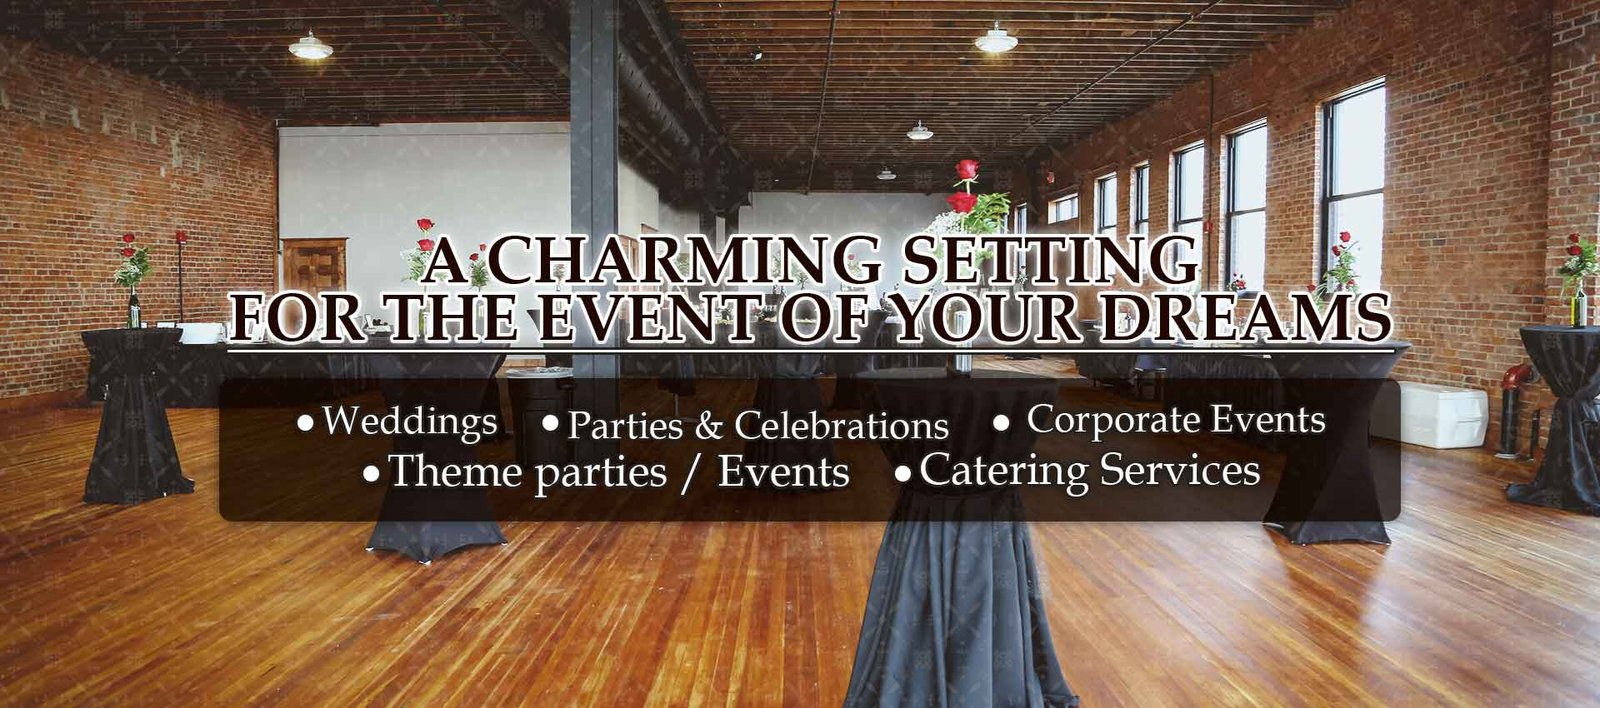 Event Venues with Catering in Fairbury